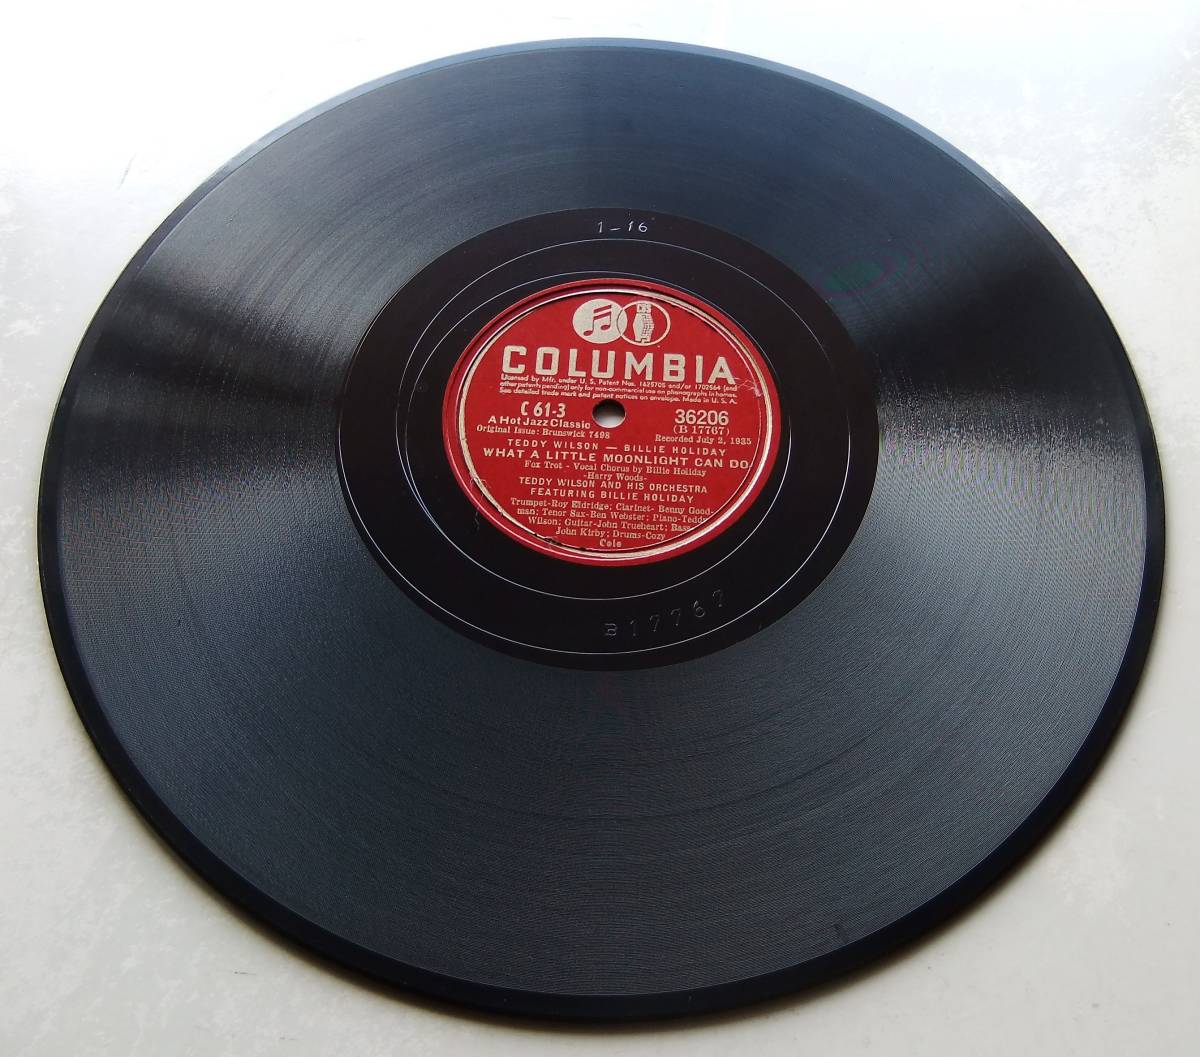 ◆ BILLIE HOLIDAY - TEDDY WILSON / What A Little Moonlight Can Do / If You Were Mine ◆ Columbia 36206 (78rpm SP) ◆ V_画像3